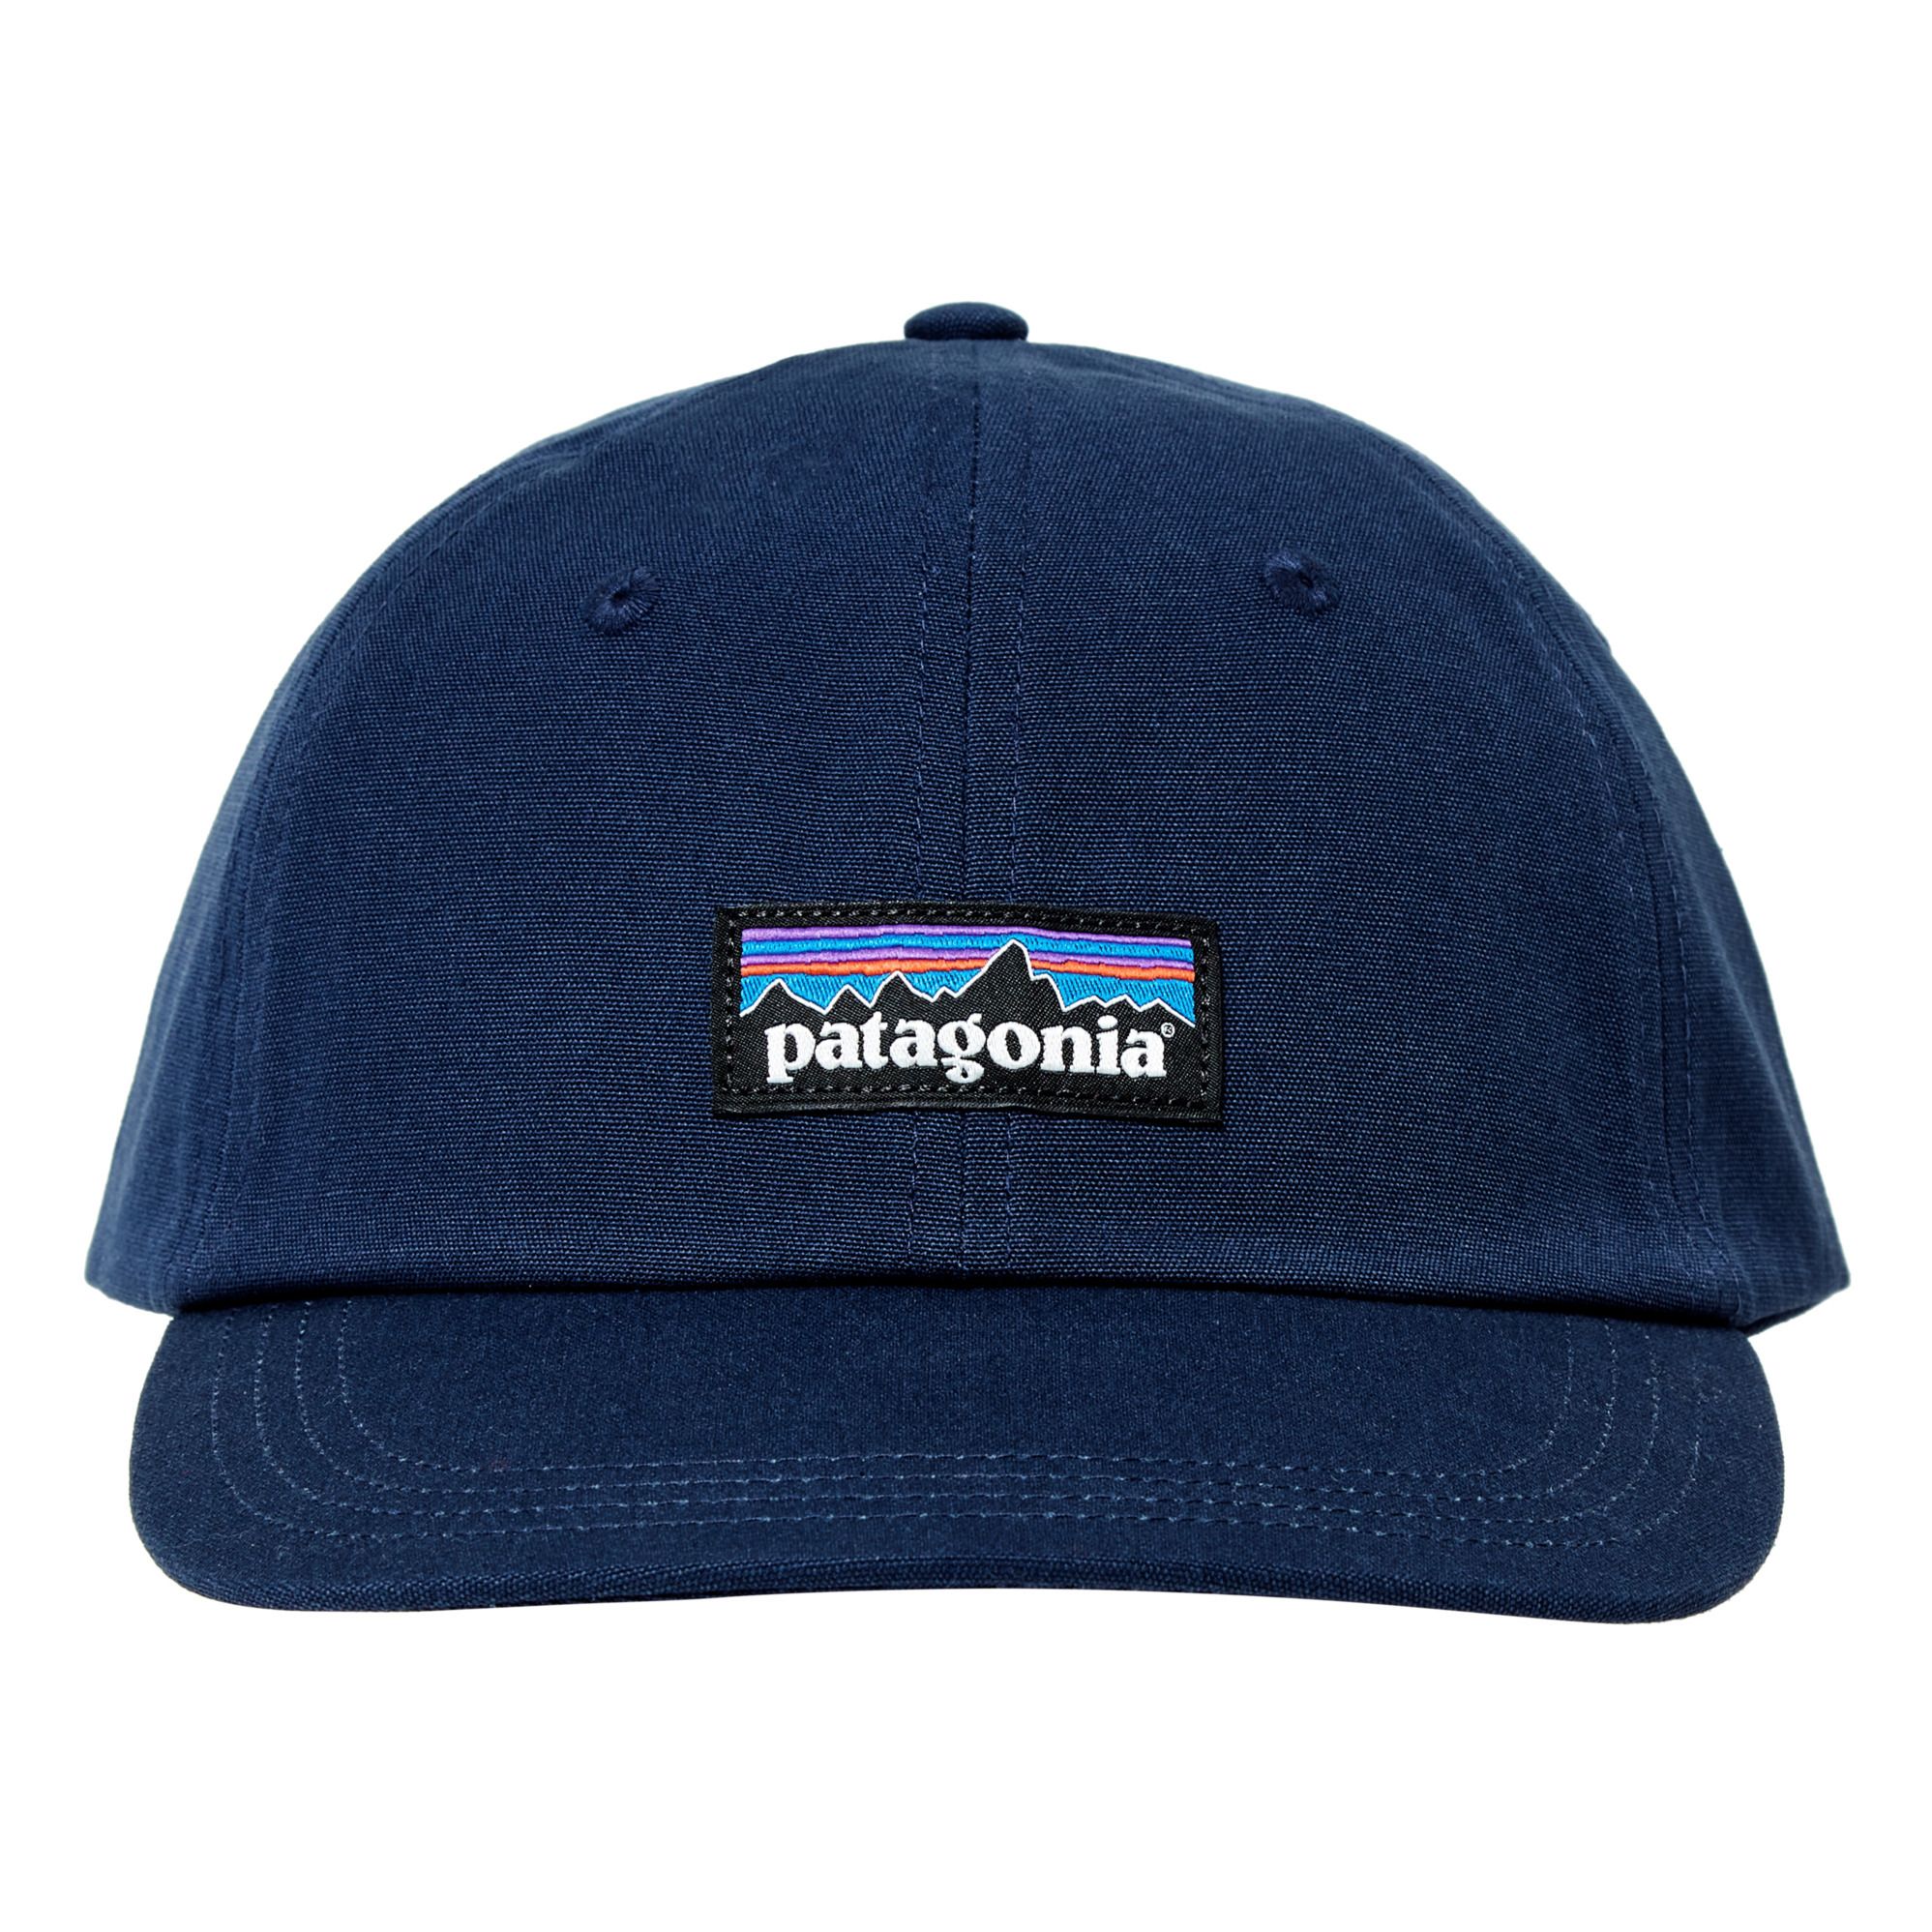 Patagonia - Casquette Unie - Collection Homme- - Homme - Bleu marine